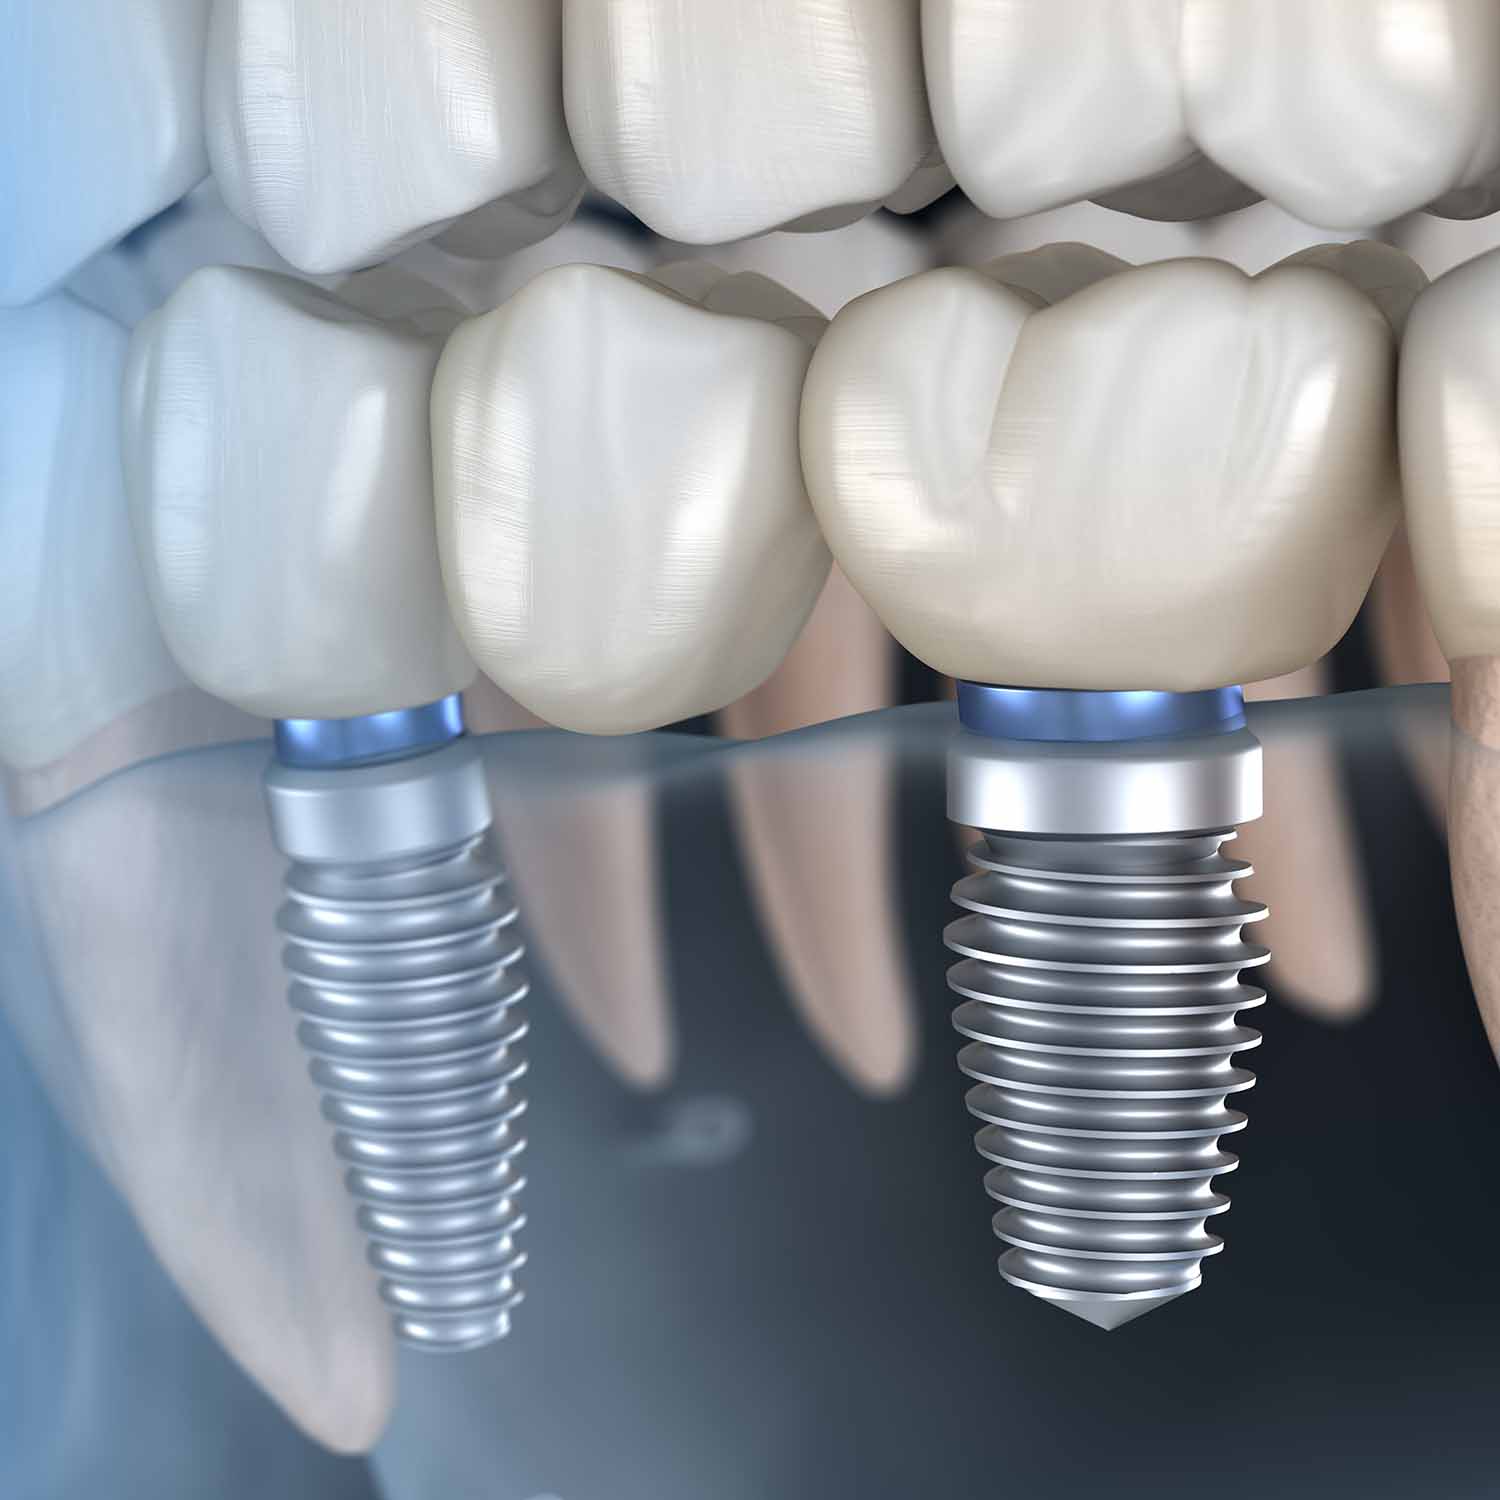 Risks and Considerations of Dental Implant Surgery